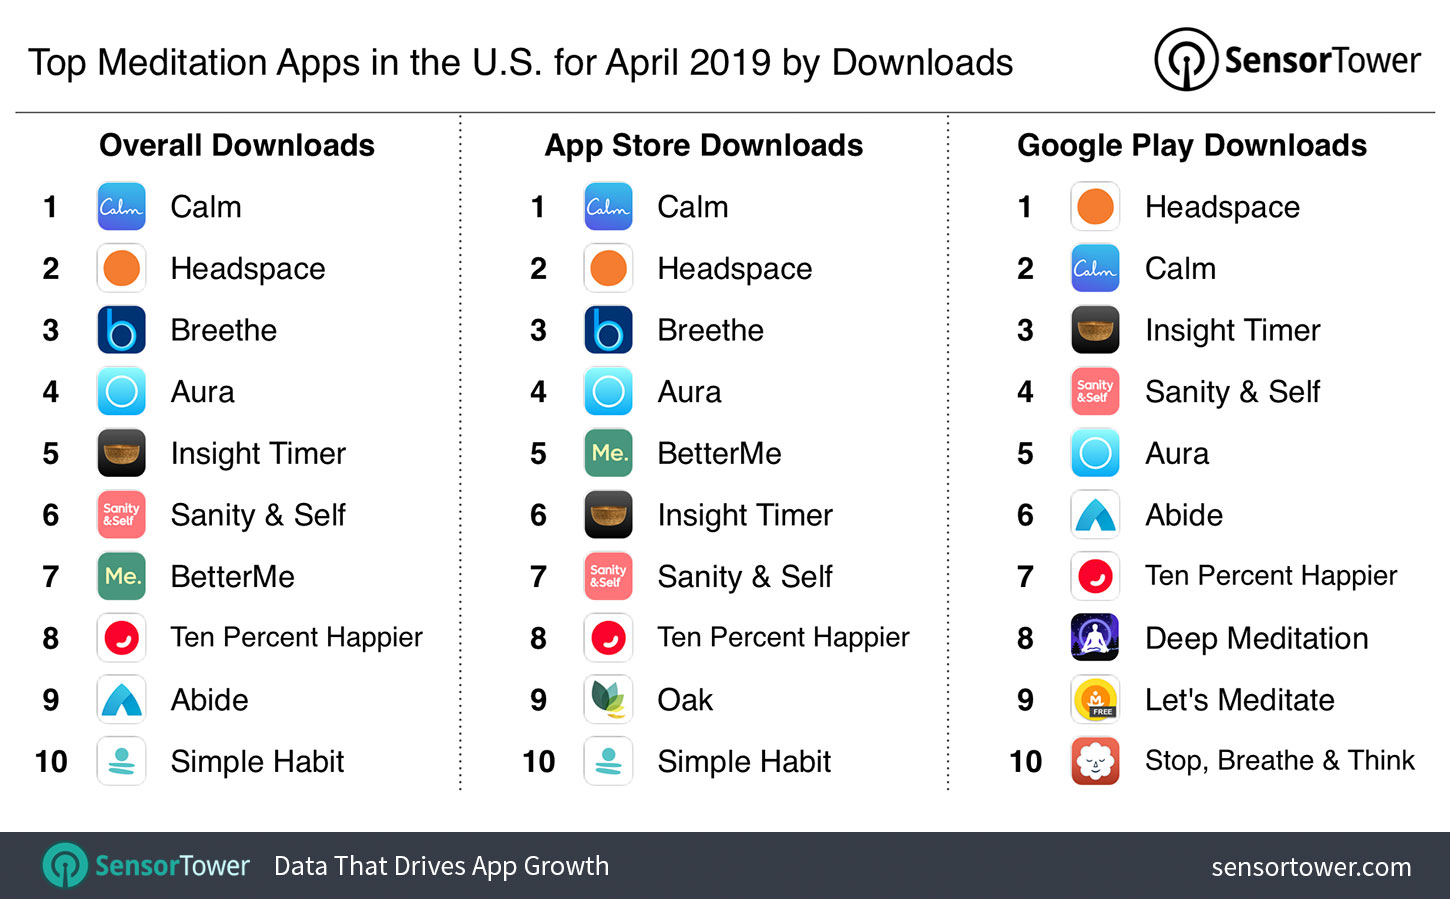 Top Meditation Apps in the U.S. for April 2019 by Downloads